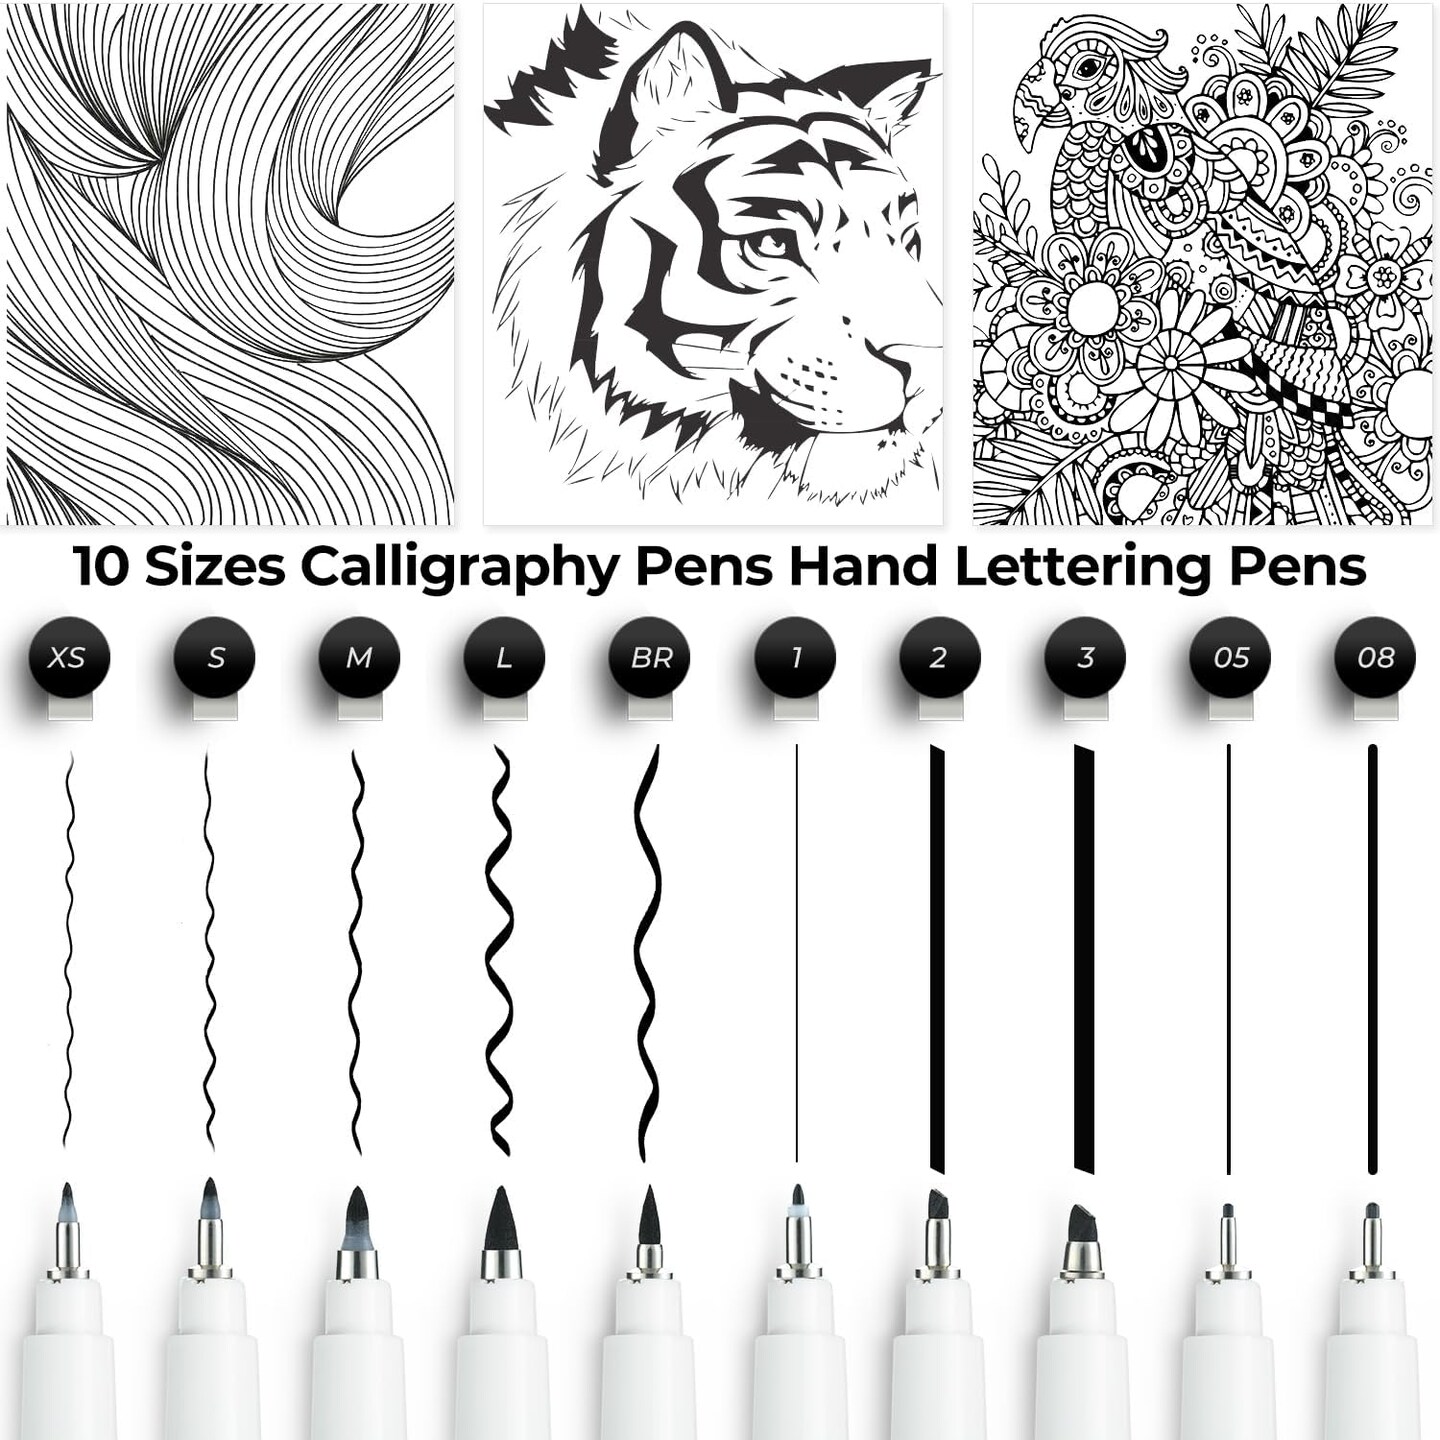 Ohuhu Calligraphy Pens, Brush Chisel Fine 10 Size Tips Hand Lettering Pens Calligraphy Brush Markers Soft and Hard Tip for Beginner Handwriting Cardmaking Sketching Drawing Illustration Bullet Journal